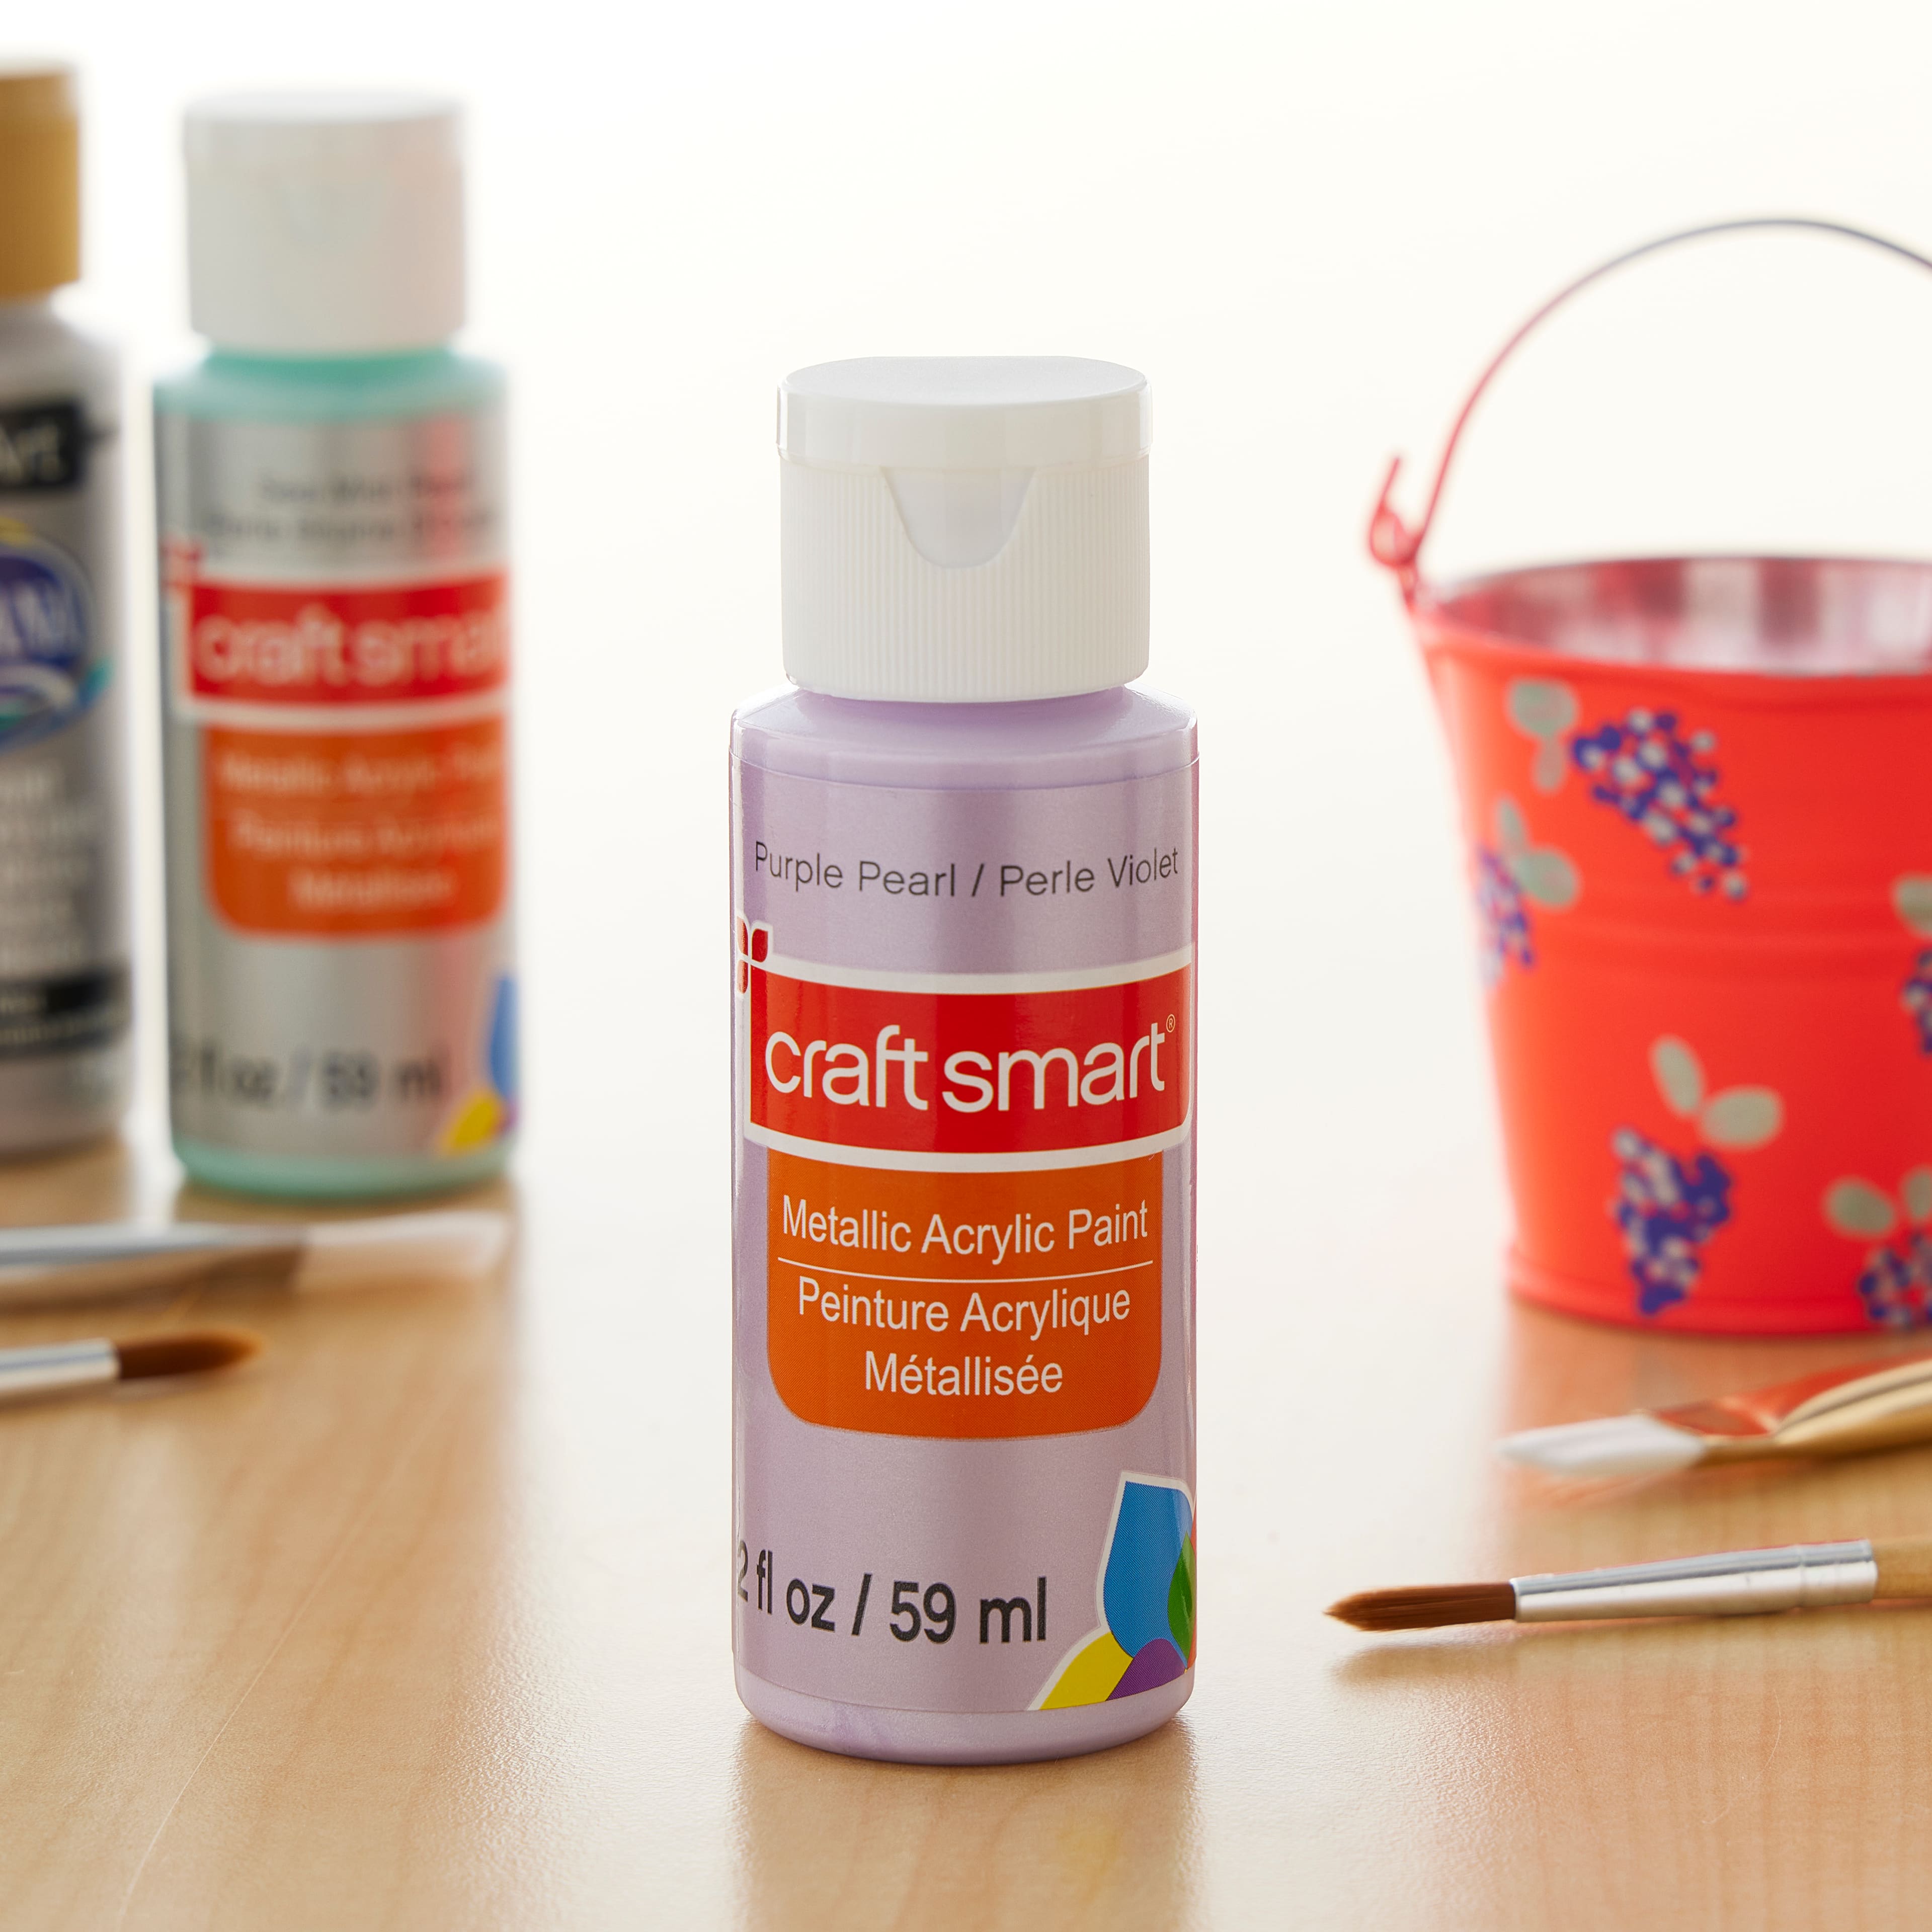 Outdoor Acrylic Paint by Craft Smart®, 2oz.